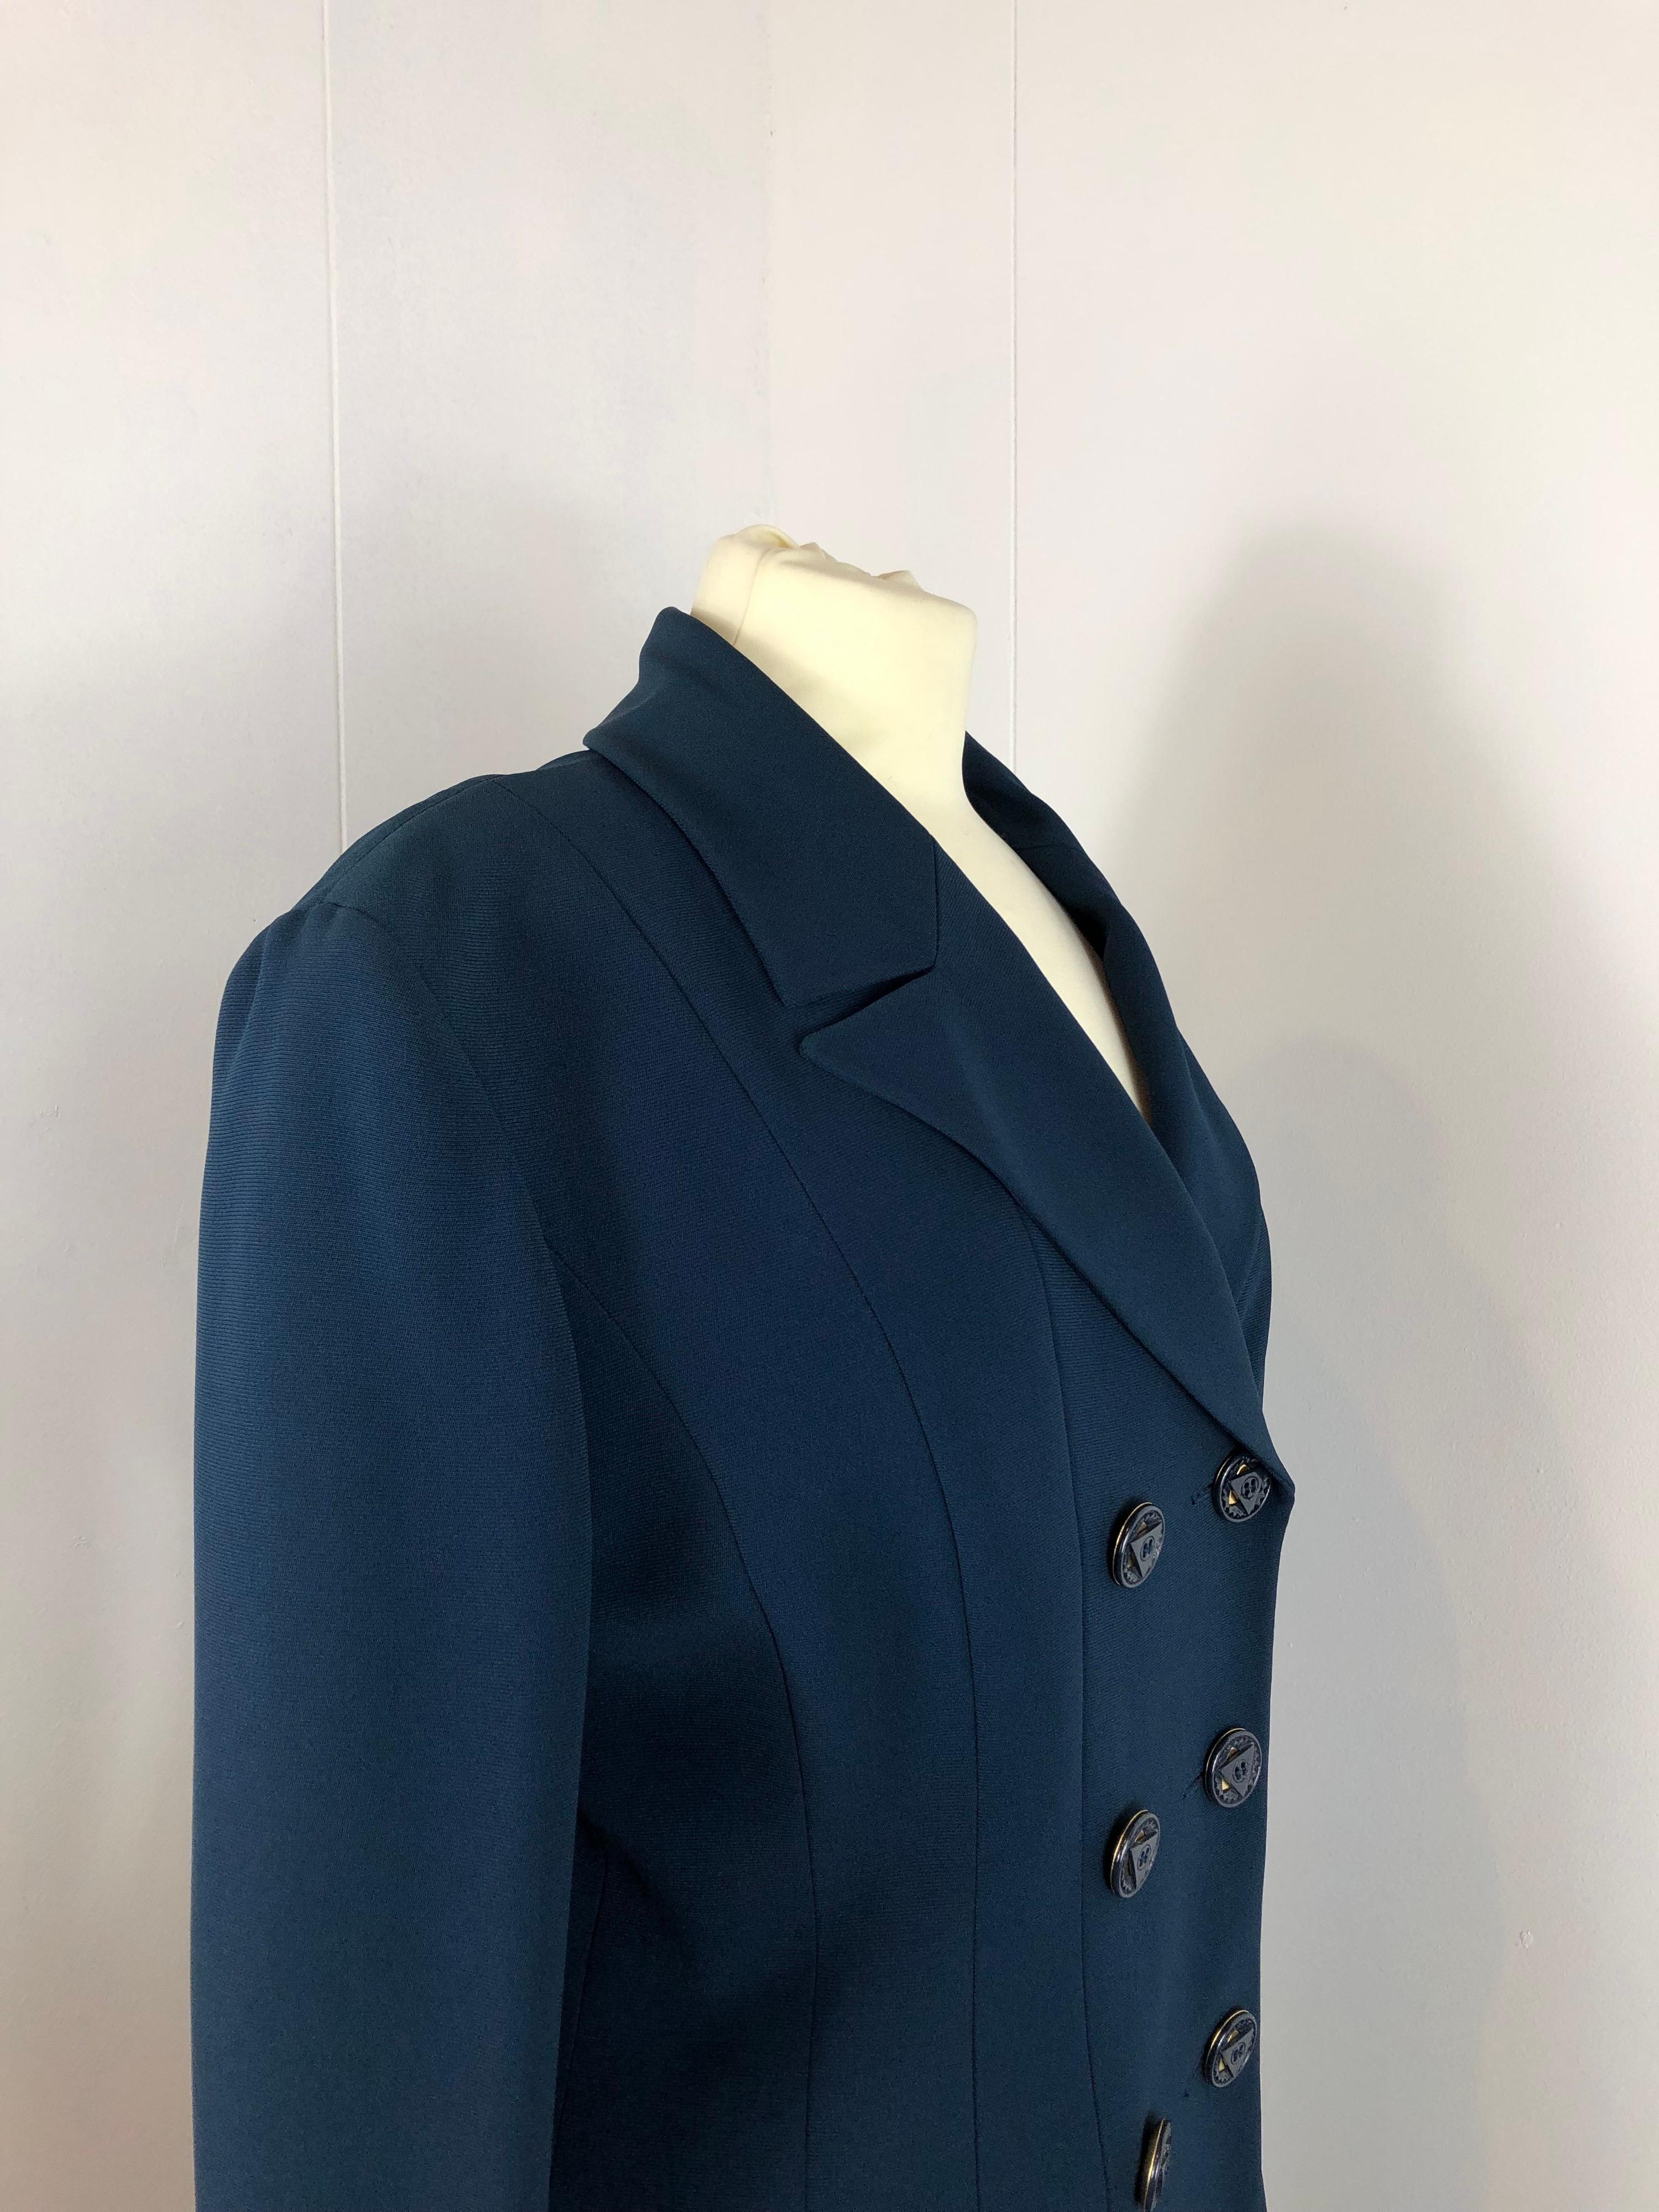 Karl Lagerfeld avio blue suit  In Excellent Condition For Sale In Carnate, IT